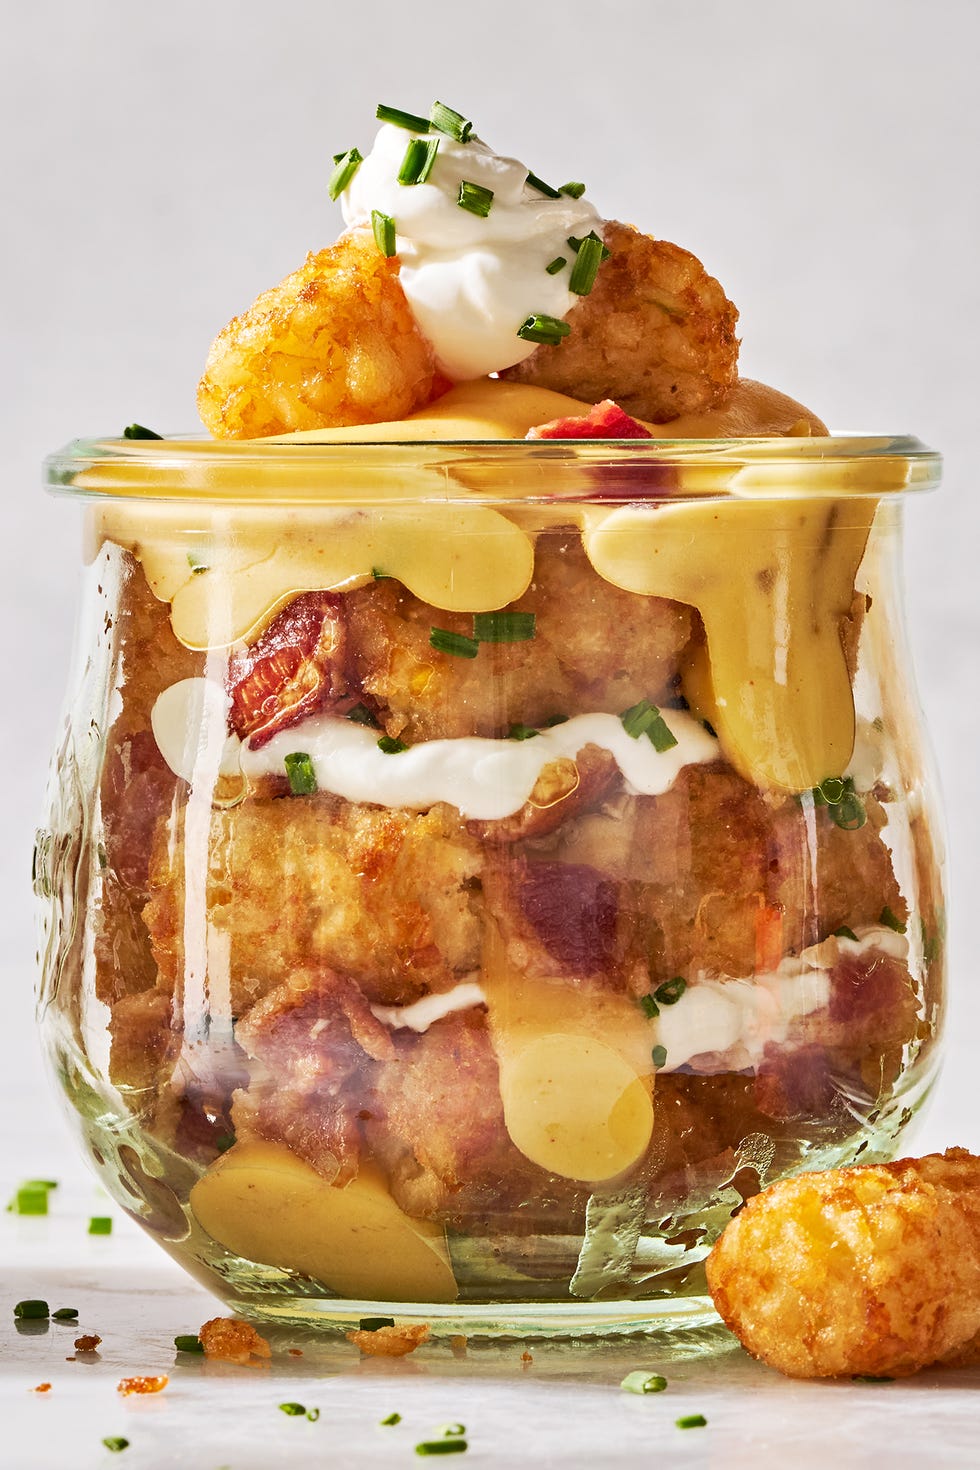 tater tots in a mason jar layered with sour cream, cheese, bacon, and chives